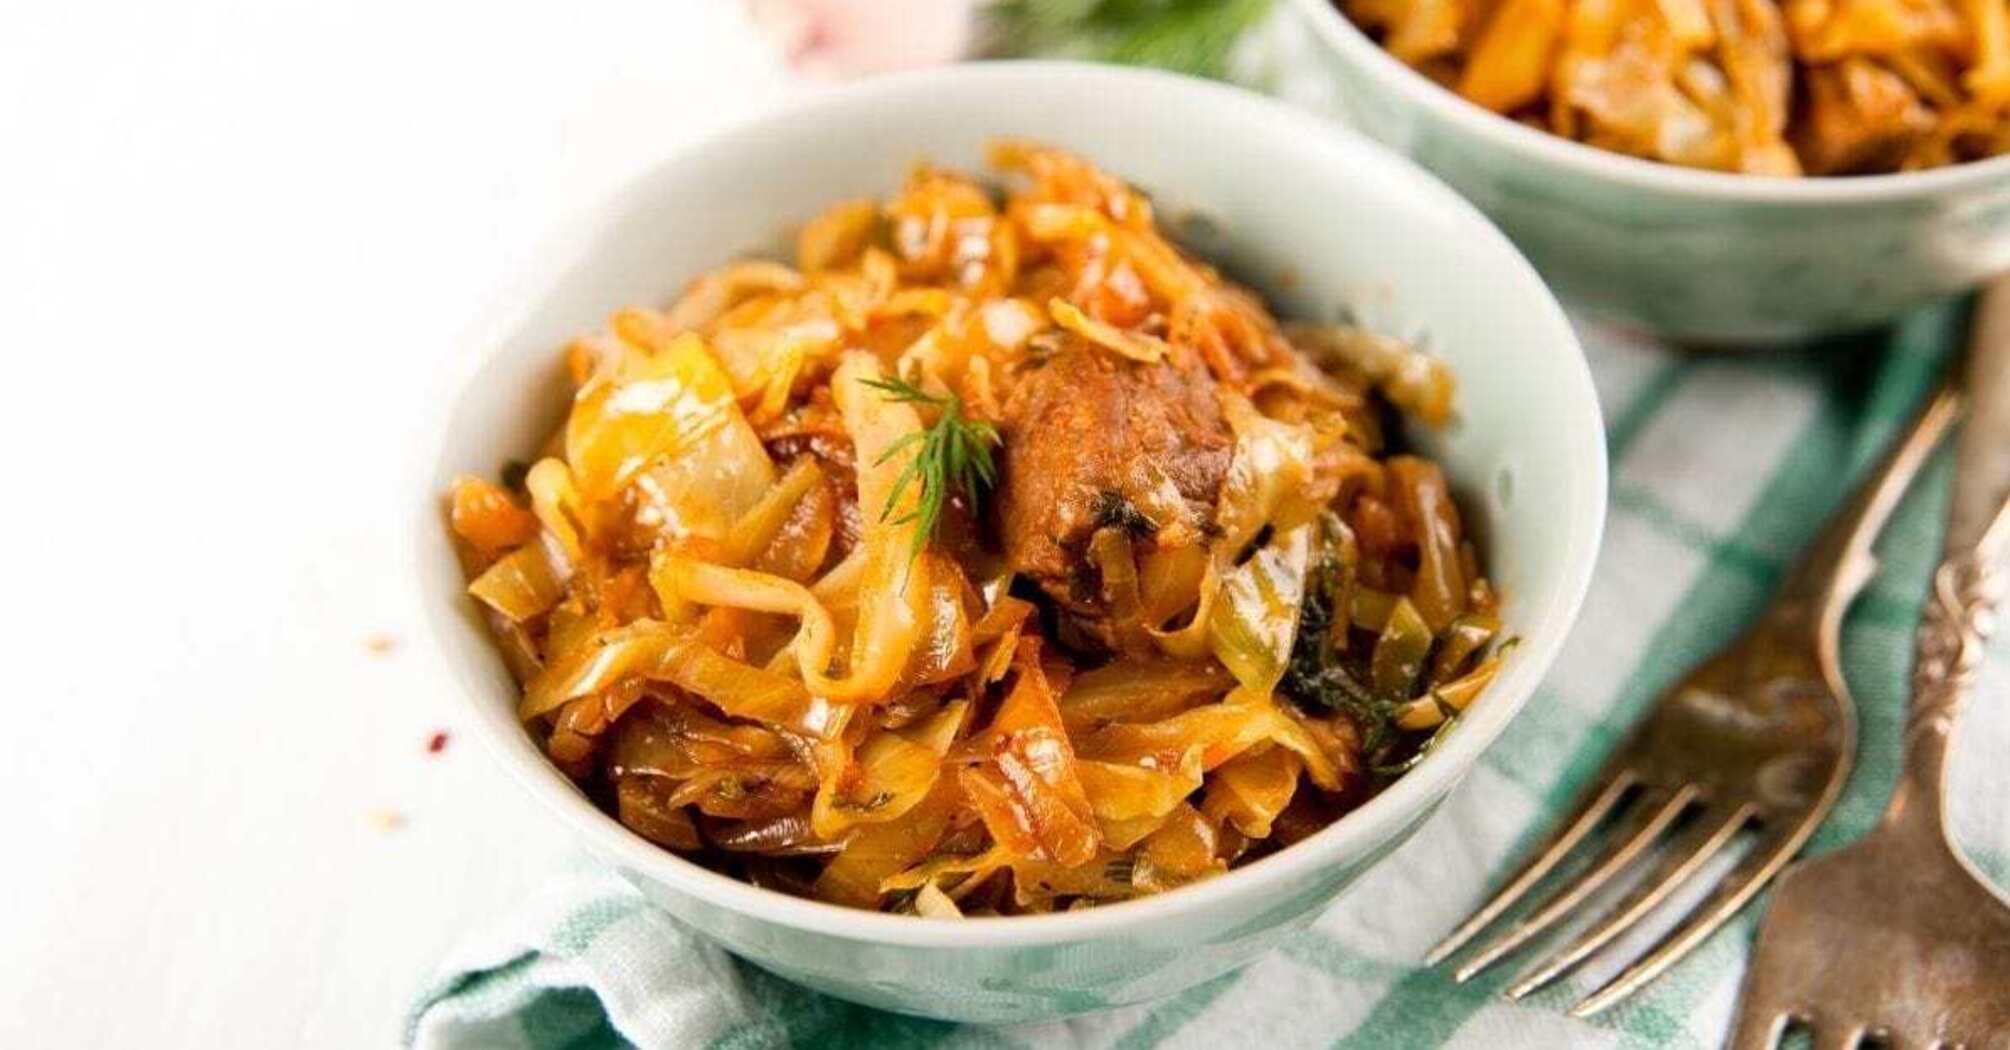 Braised cabbage with meat for dinner: cooked in a pan